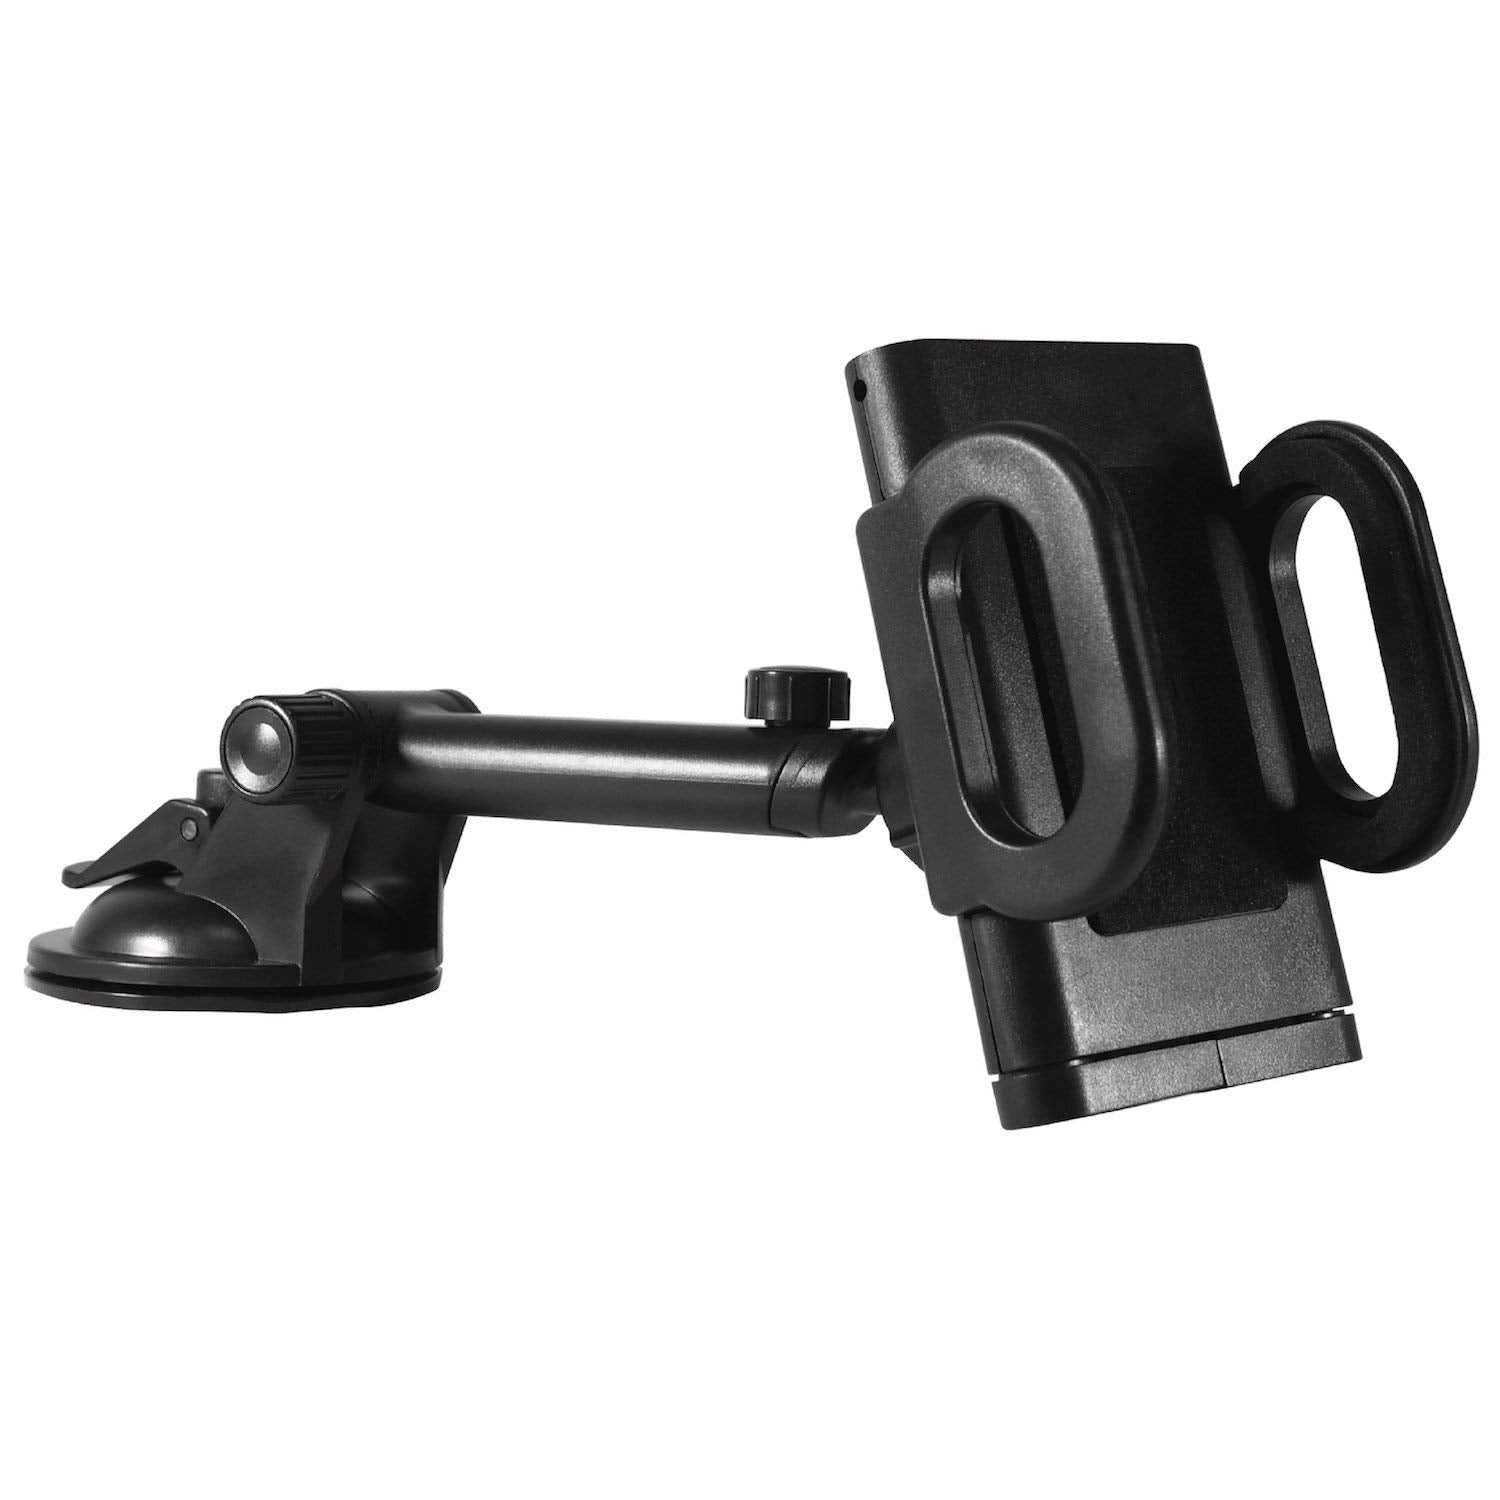 Macally TELEHOLDER Dashboard/Windshield Suction Cup Car Phone GPS Mount Holder with Extendable Telescopic Arm